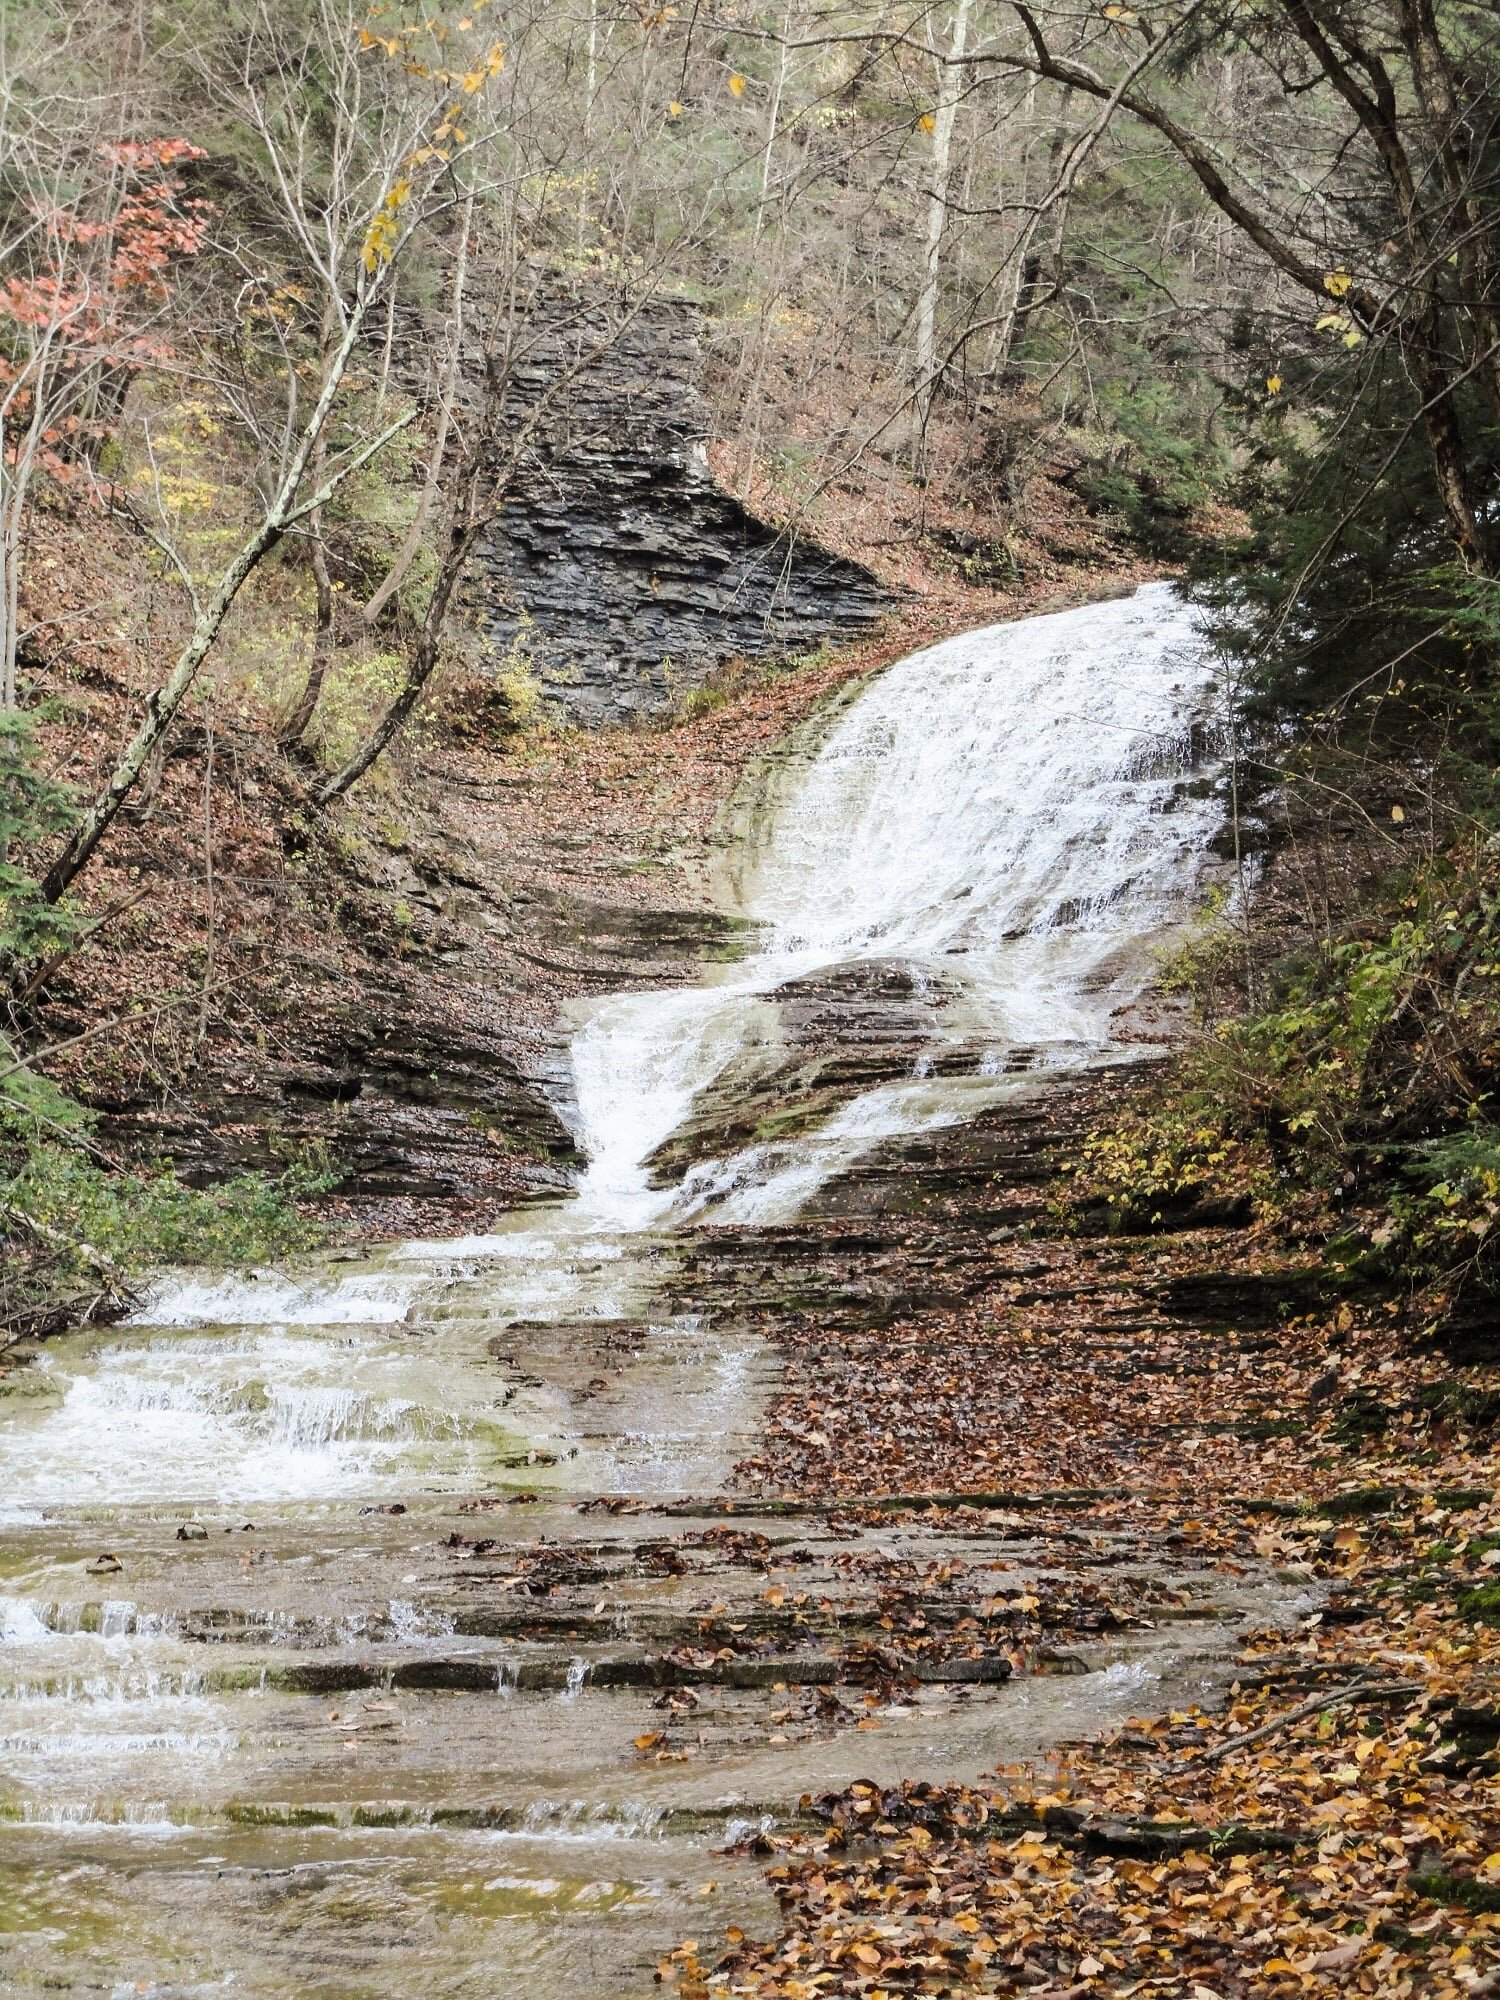  Buttermilk Falls State Park, Upstate New York fall travel ideas | Blooming Magnolias Blog | Travel, state parks 